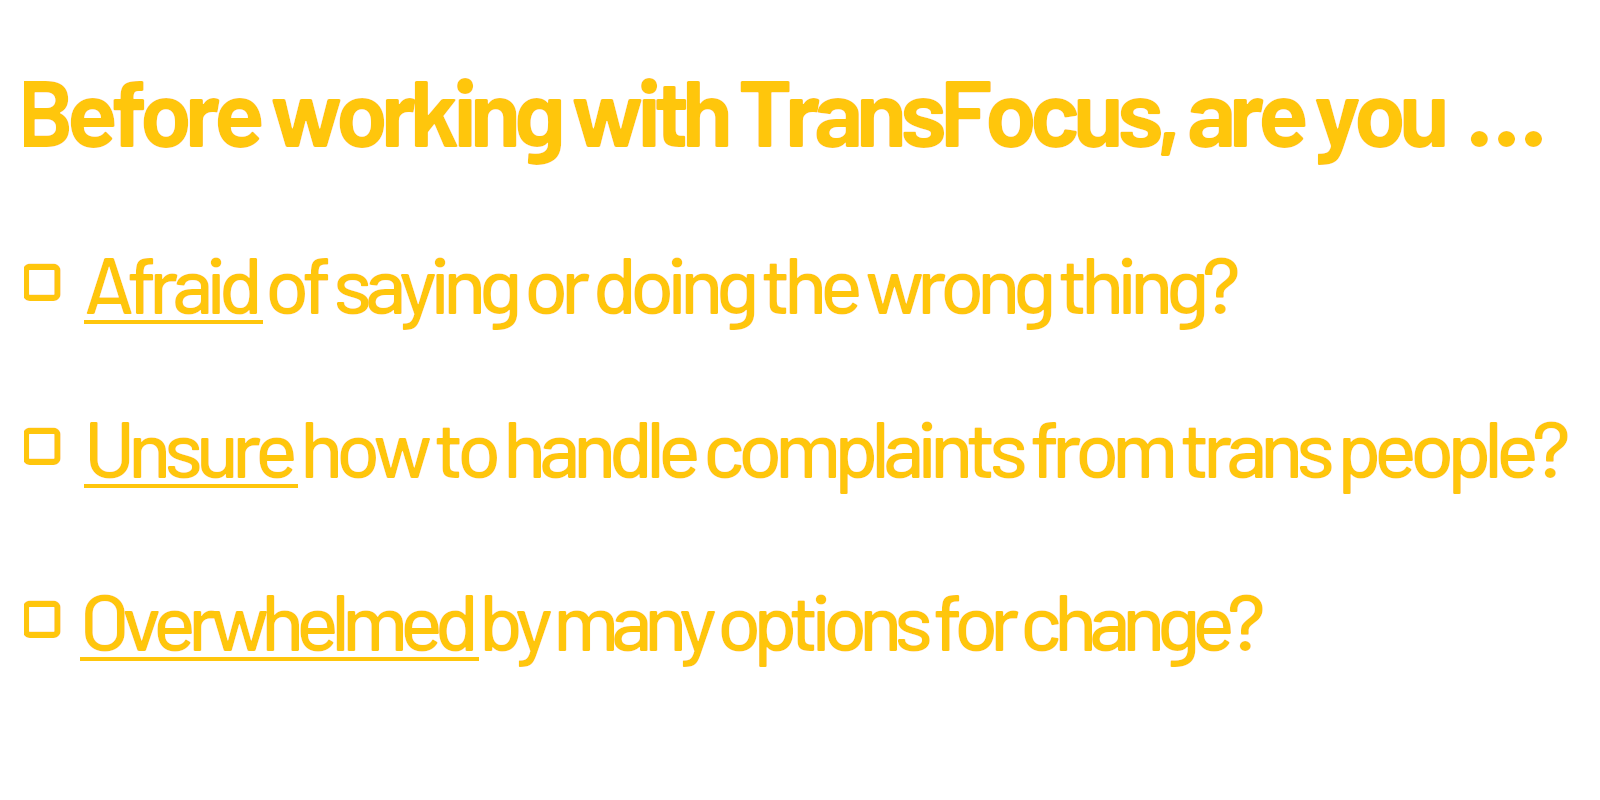 Before working with TransFocus, are you....